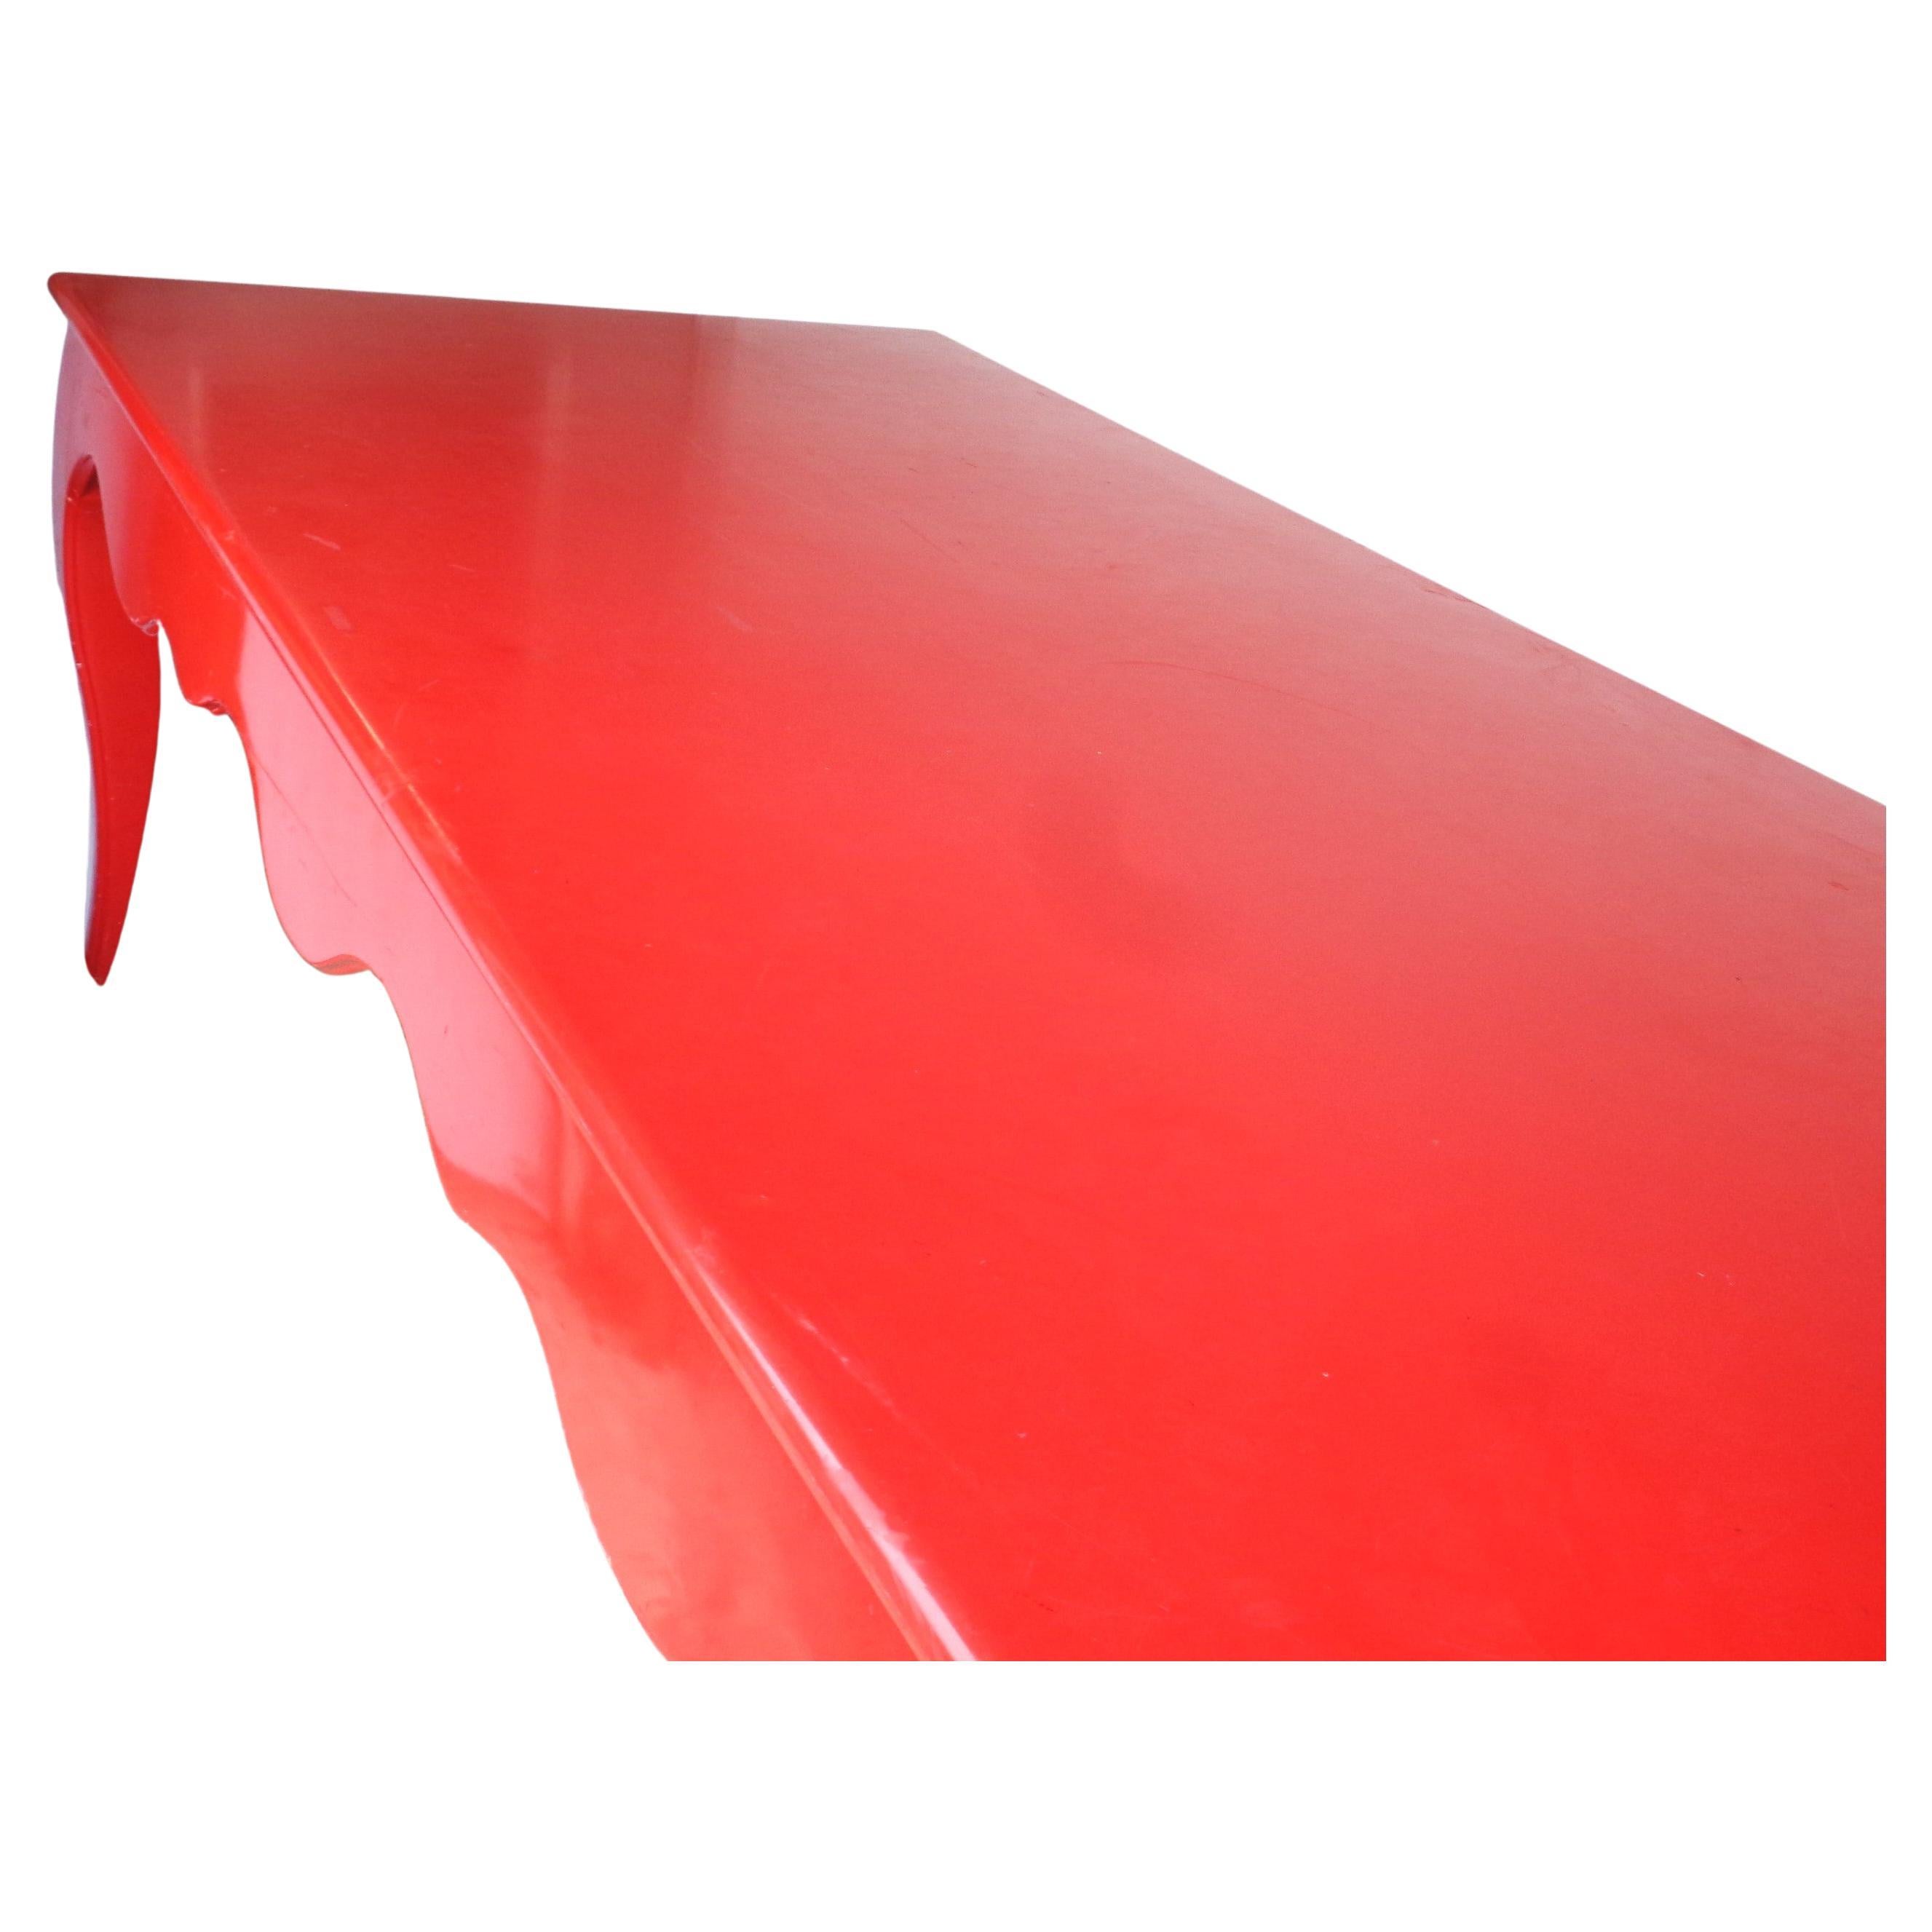 Large Red Lacquered Scallop Design Table style of Jean-Michel Frank, Circa 1970 For Sale 1